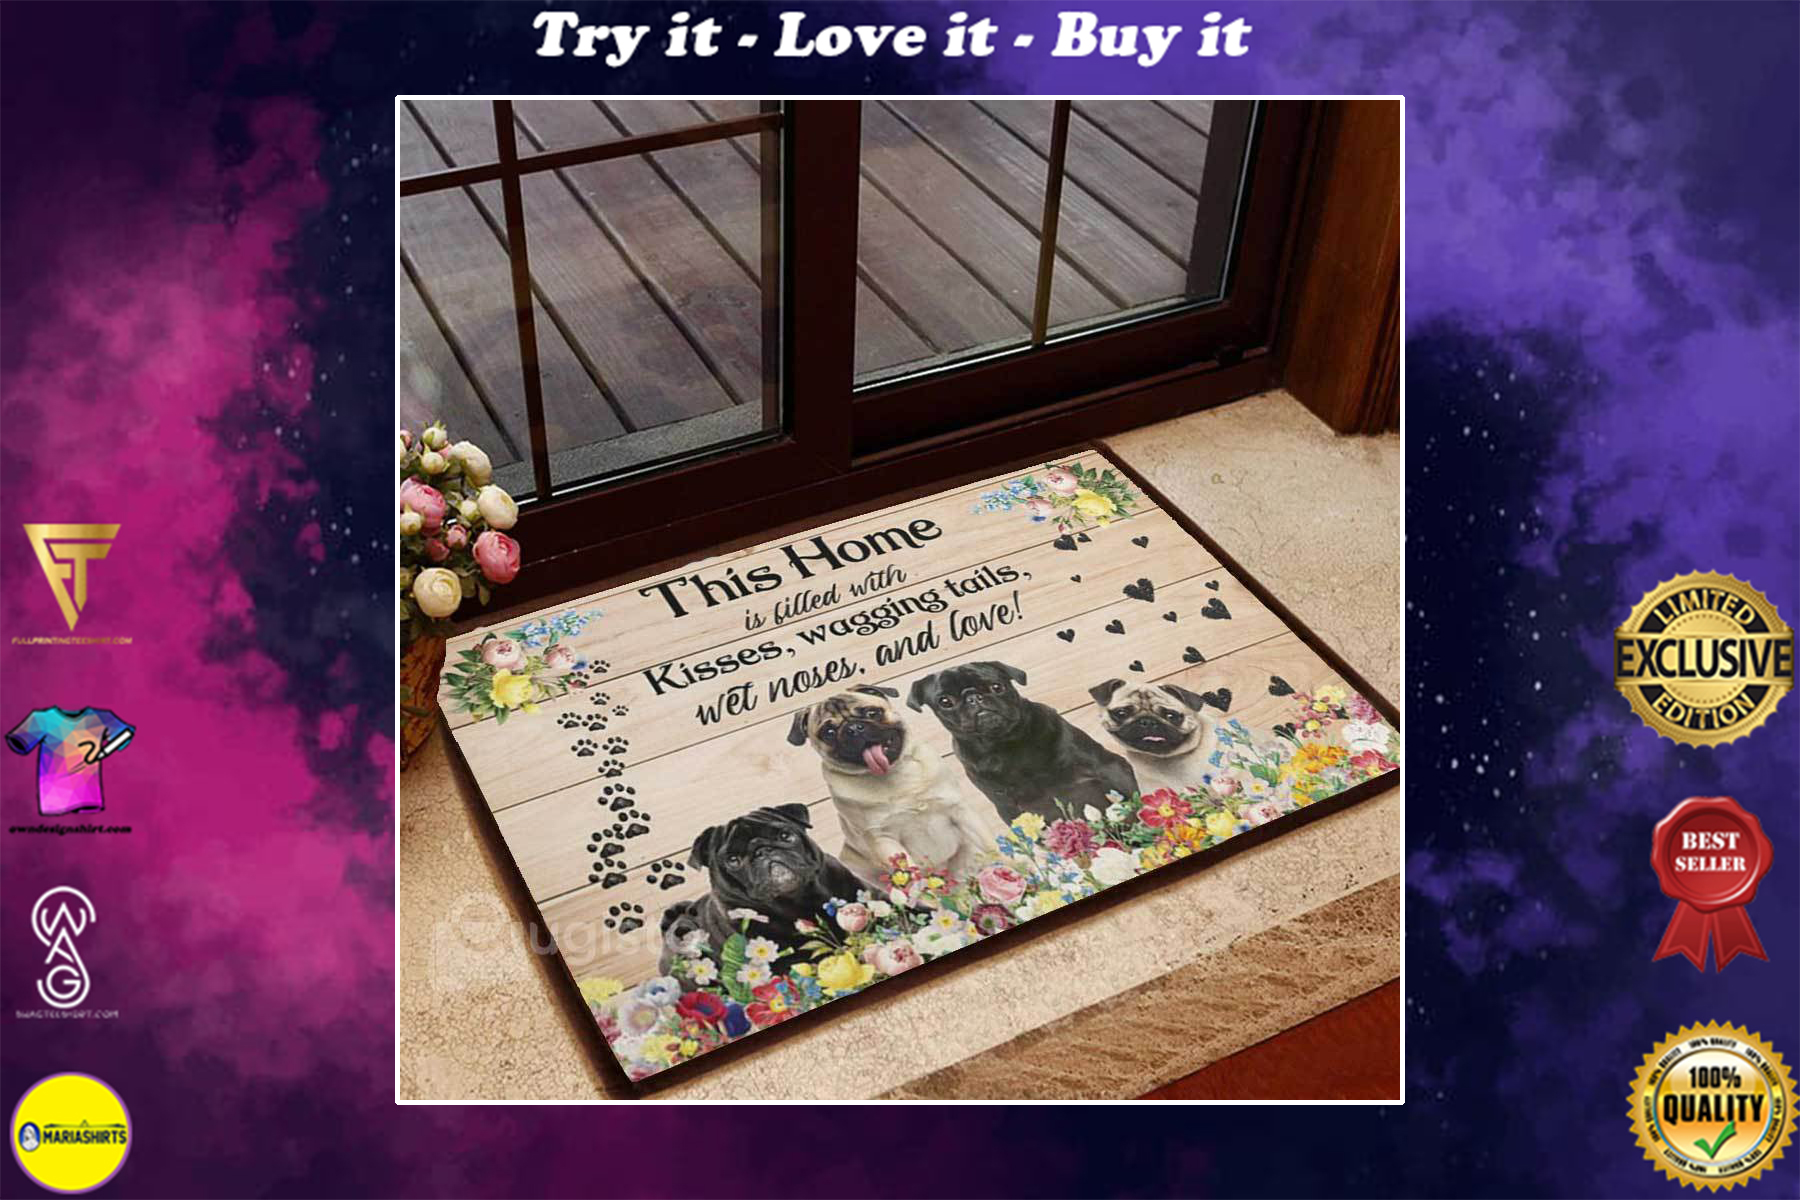 [special edition] floral pug this home is filled with kisses wagging tails doormat – maria